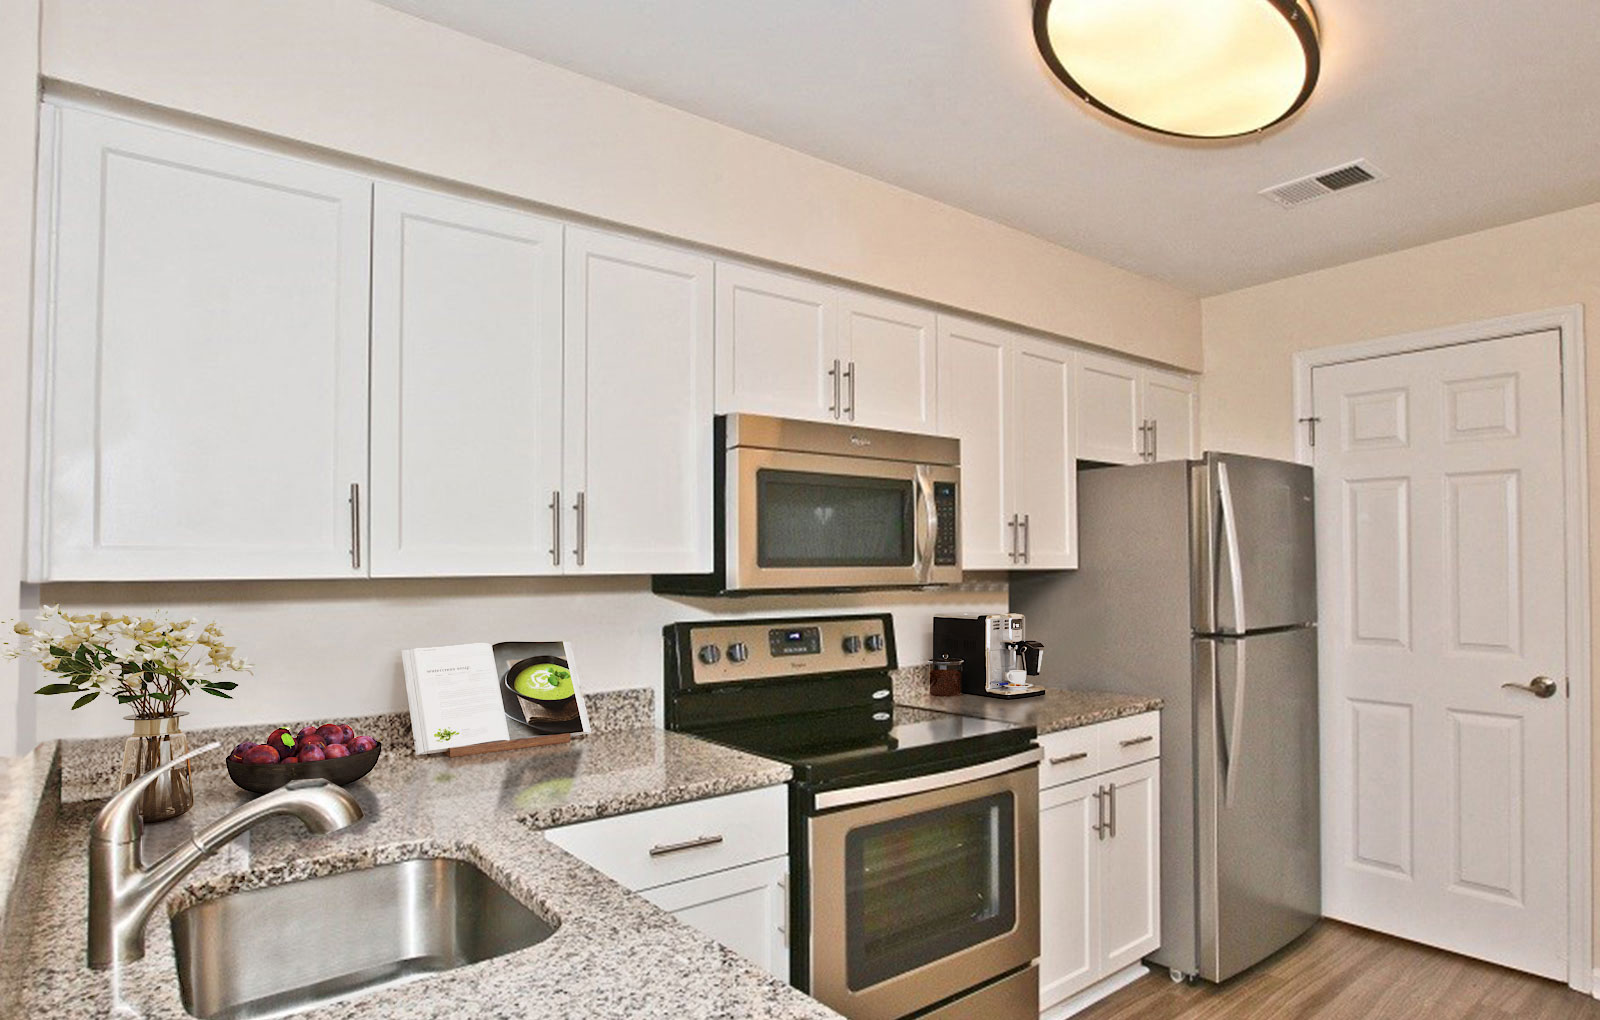 Renovated kitchen featuring stainless steel appliances